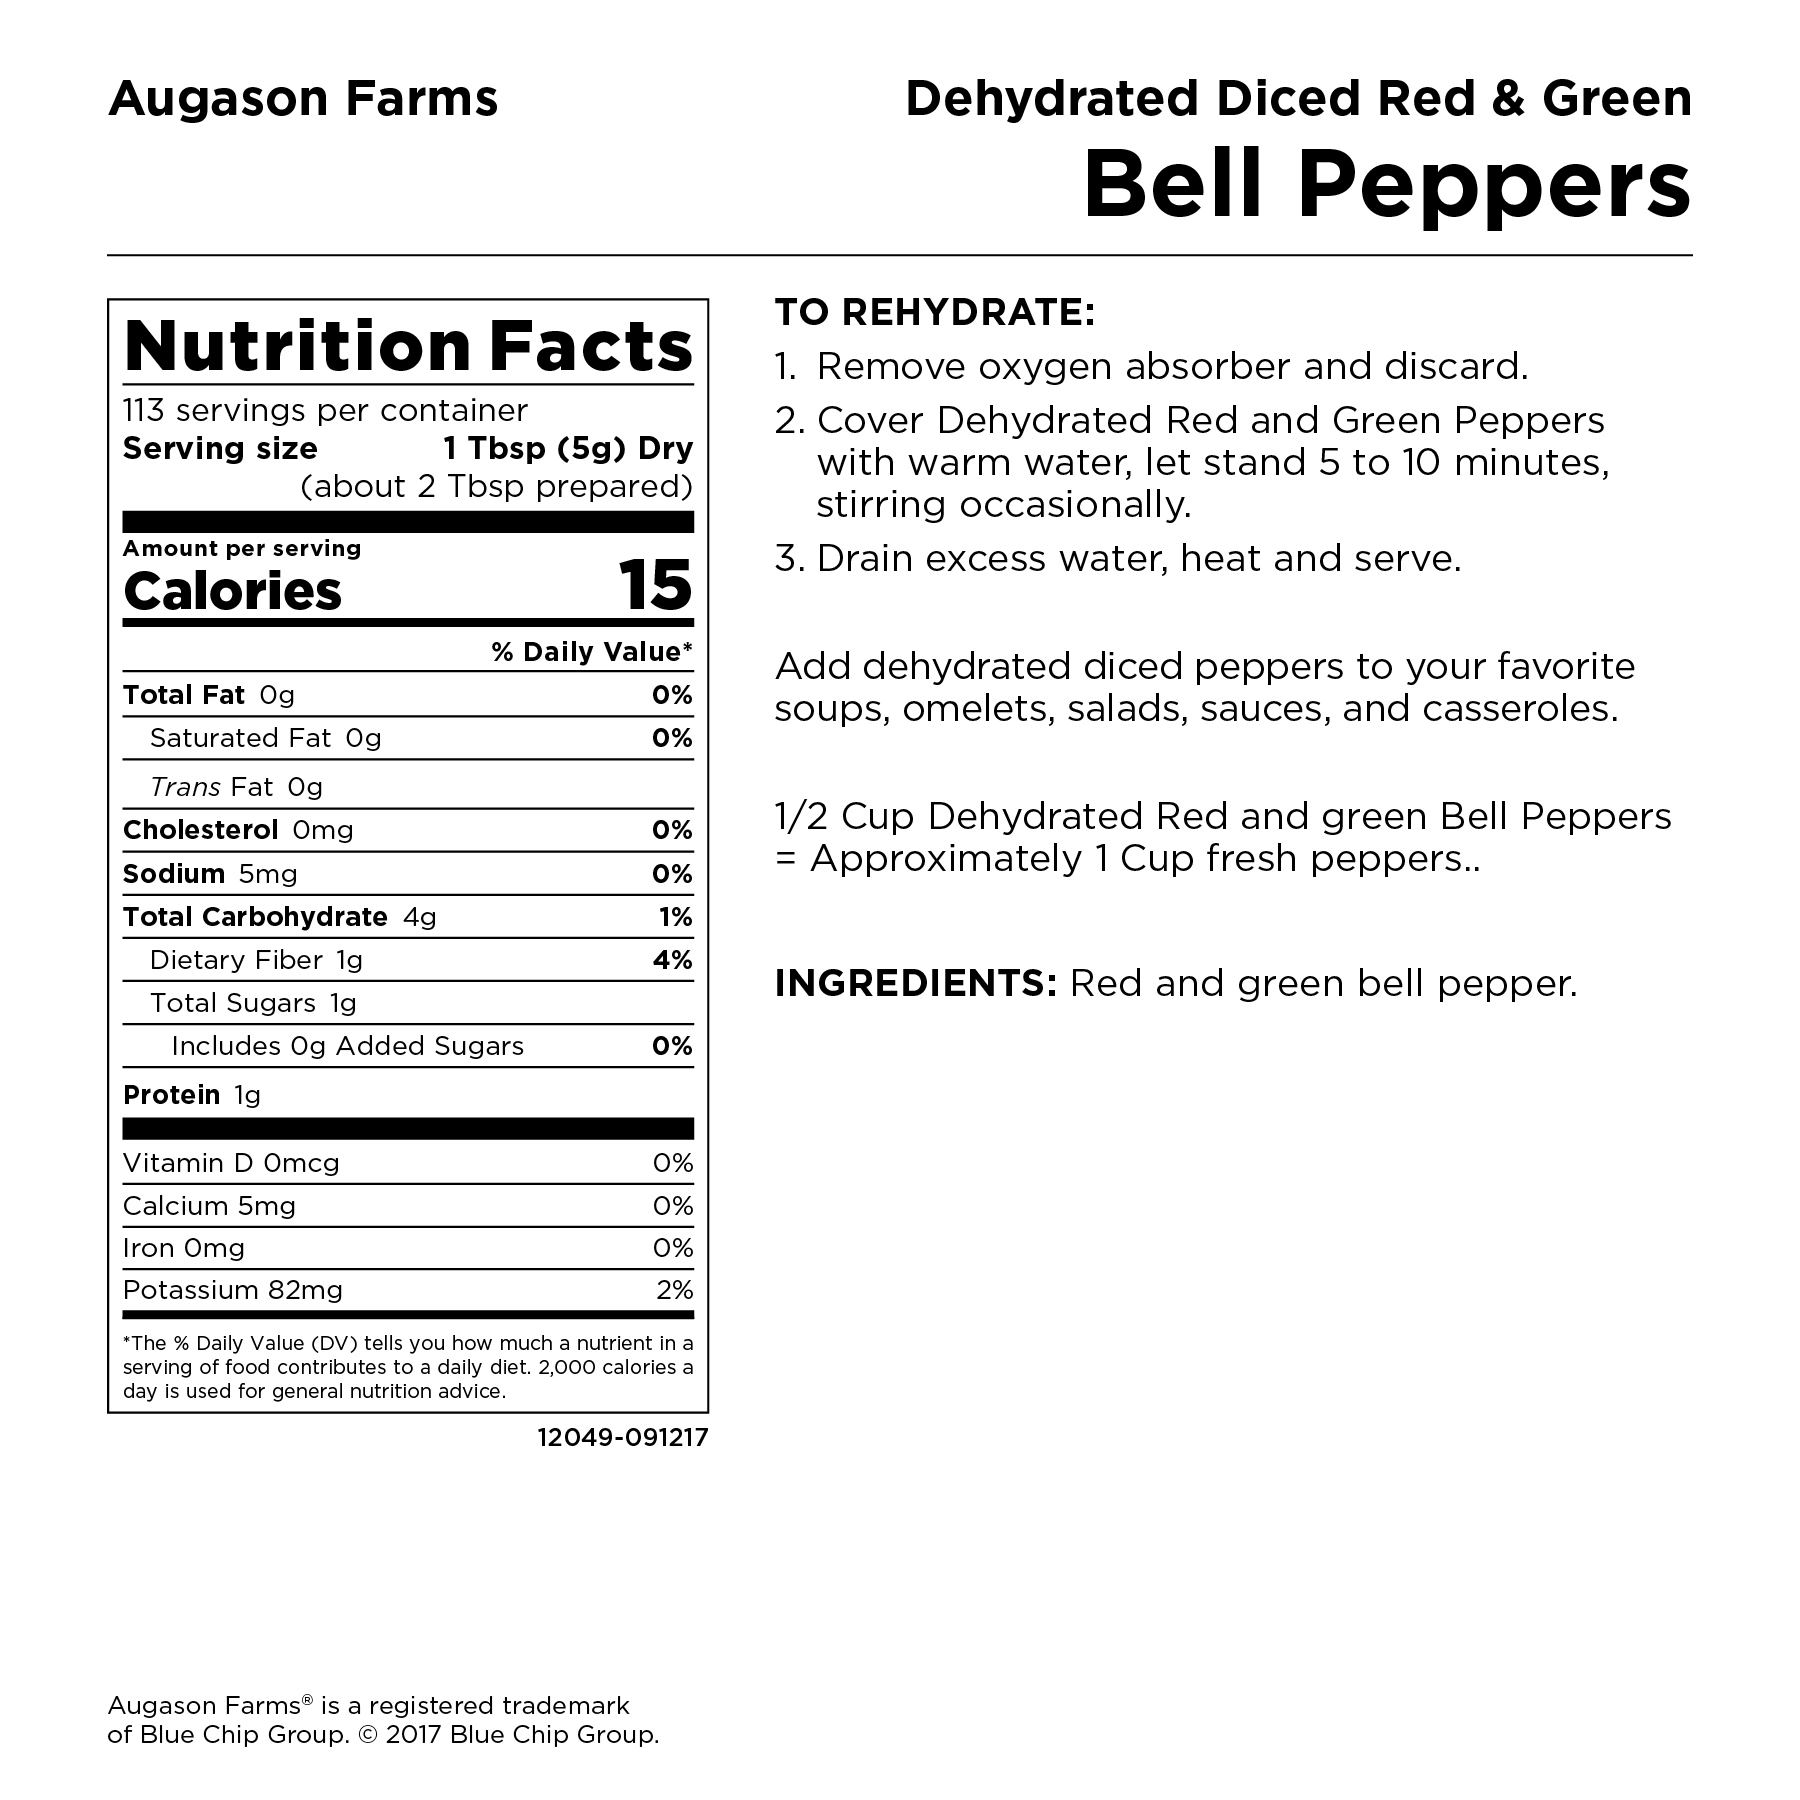 Augason Farms Dehydrated Diced Red & Green Bell Peppers 1 lb 4 oz No. 10 Can - image 3 of 7